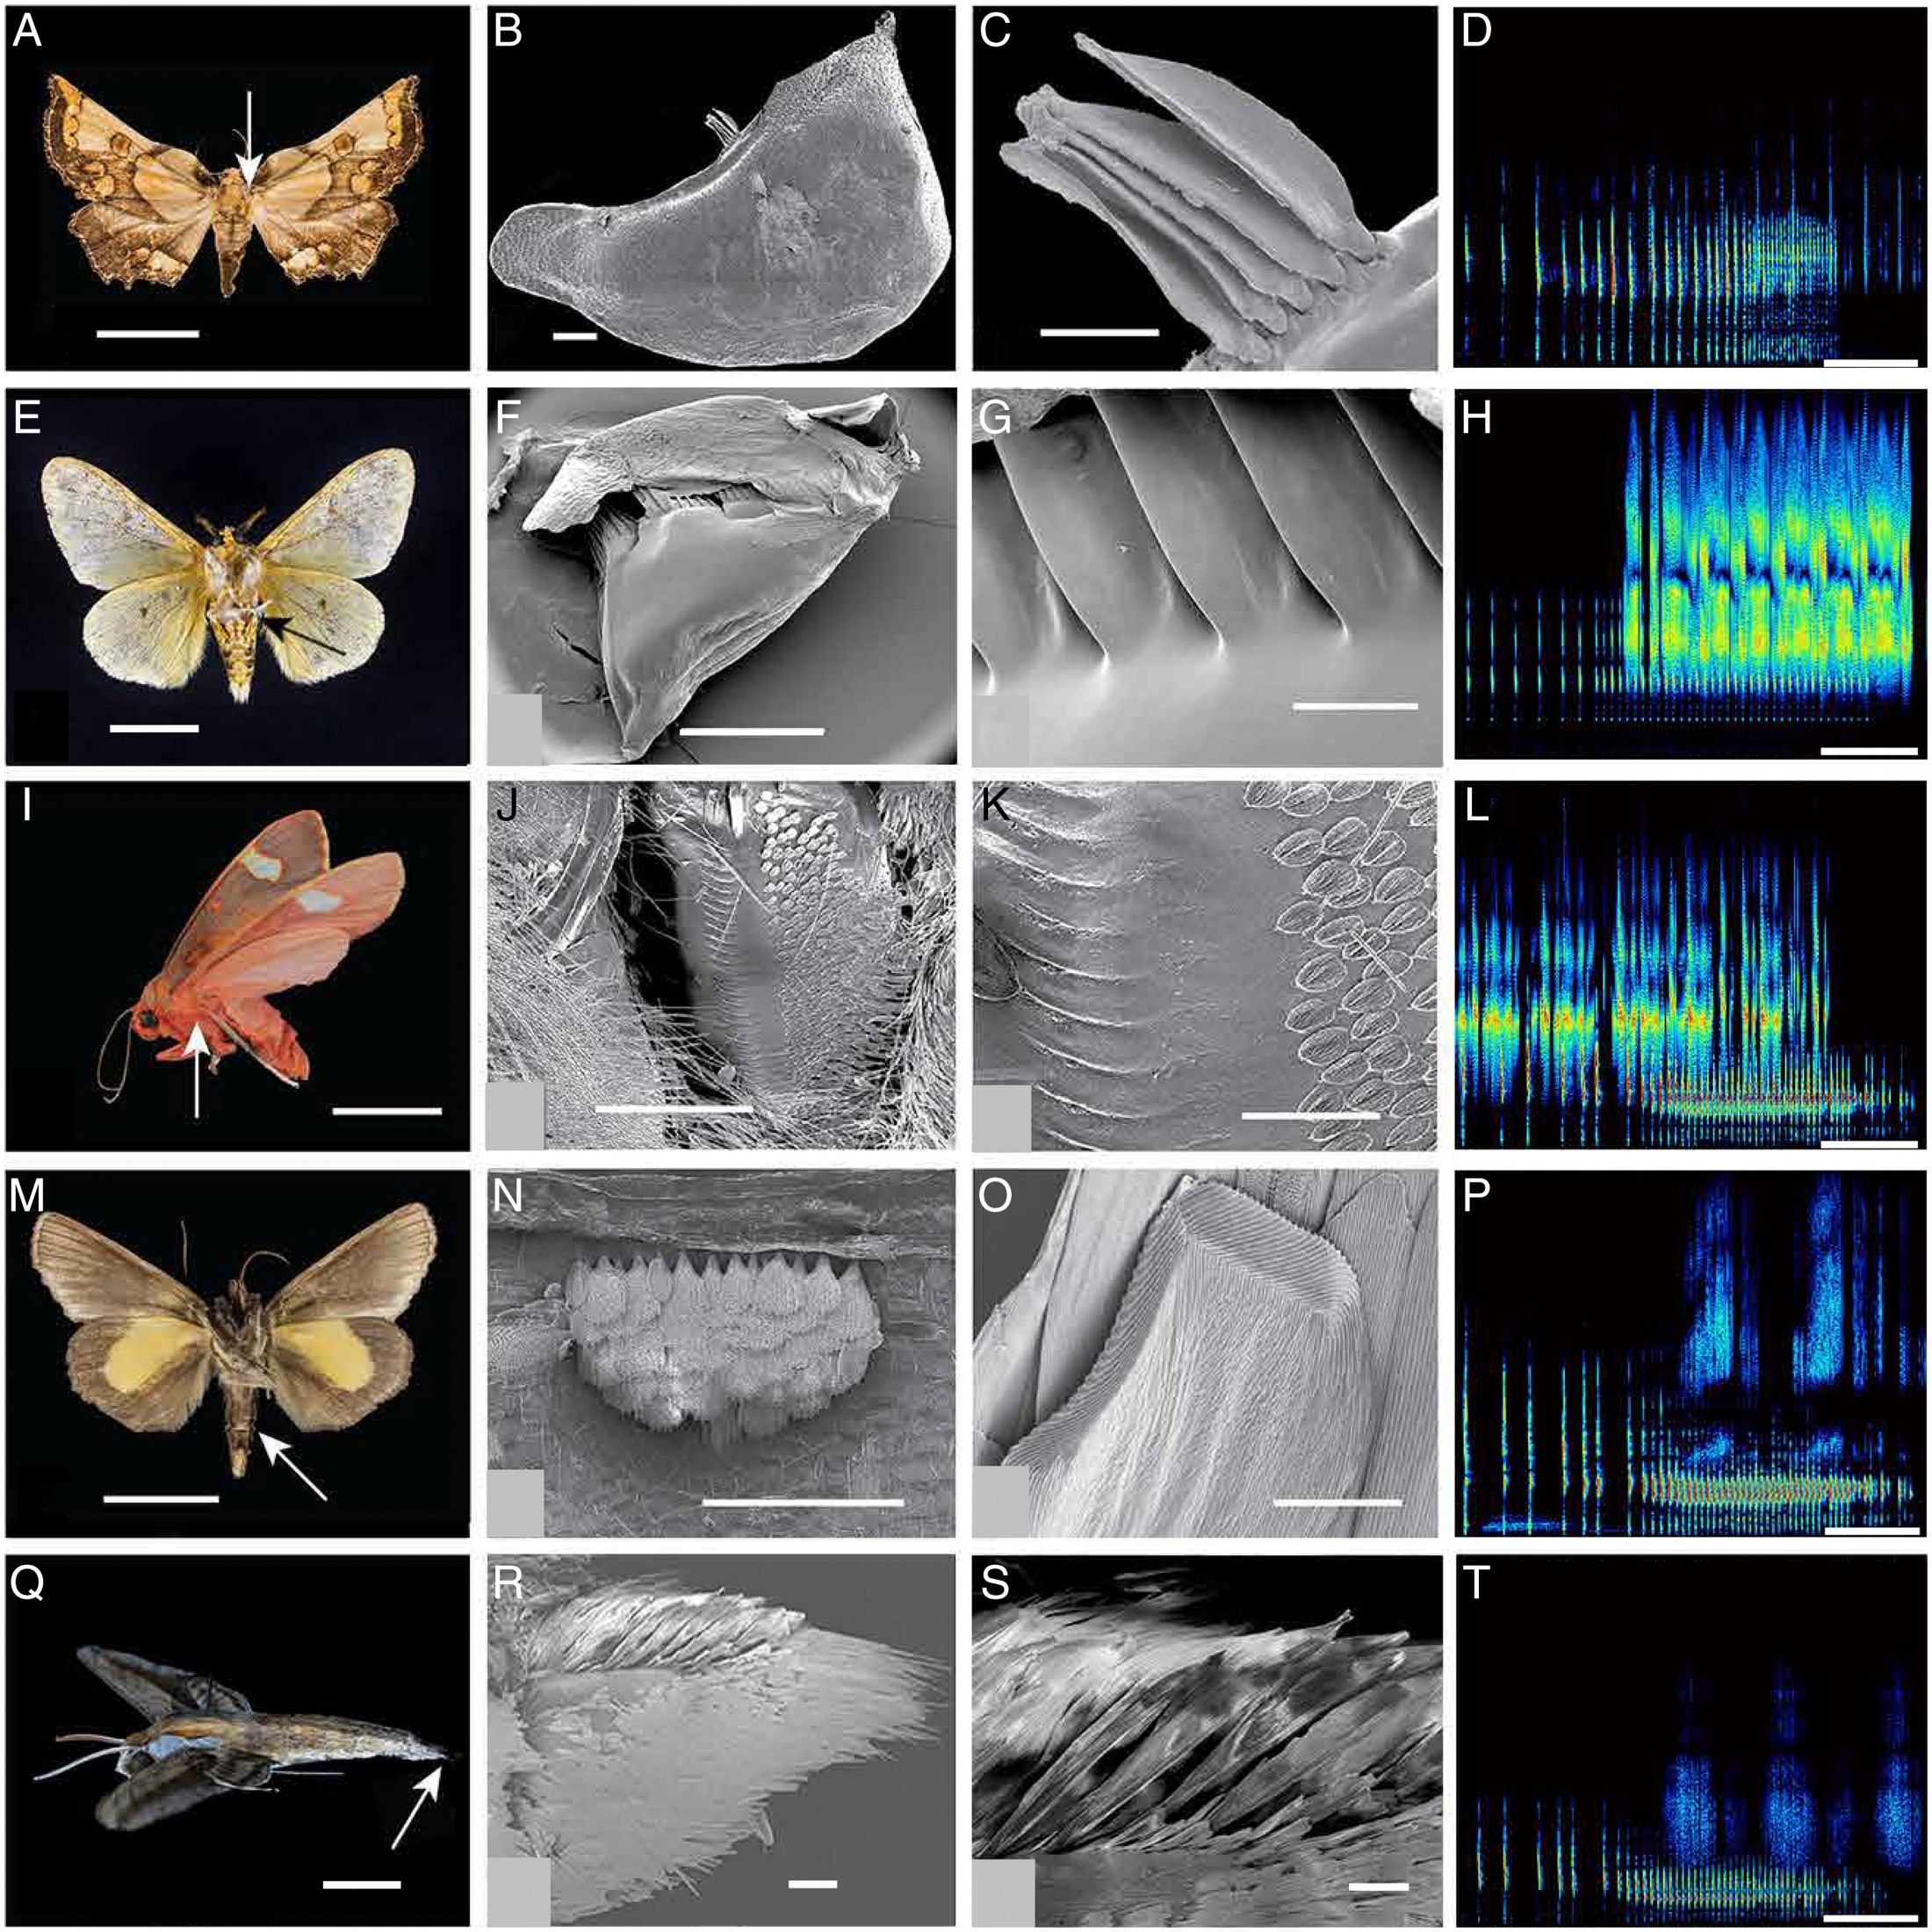 5 moths, close-ups of their sound-producing anatomy, and imaging of the sounds they make